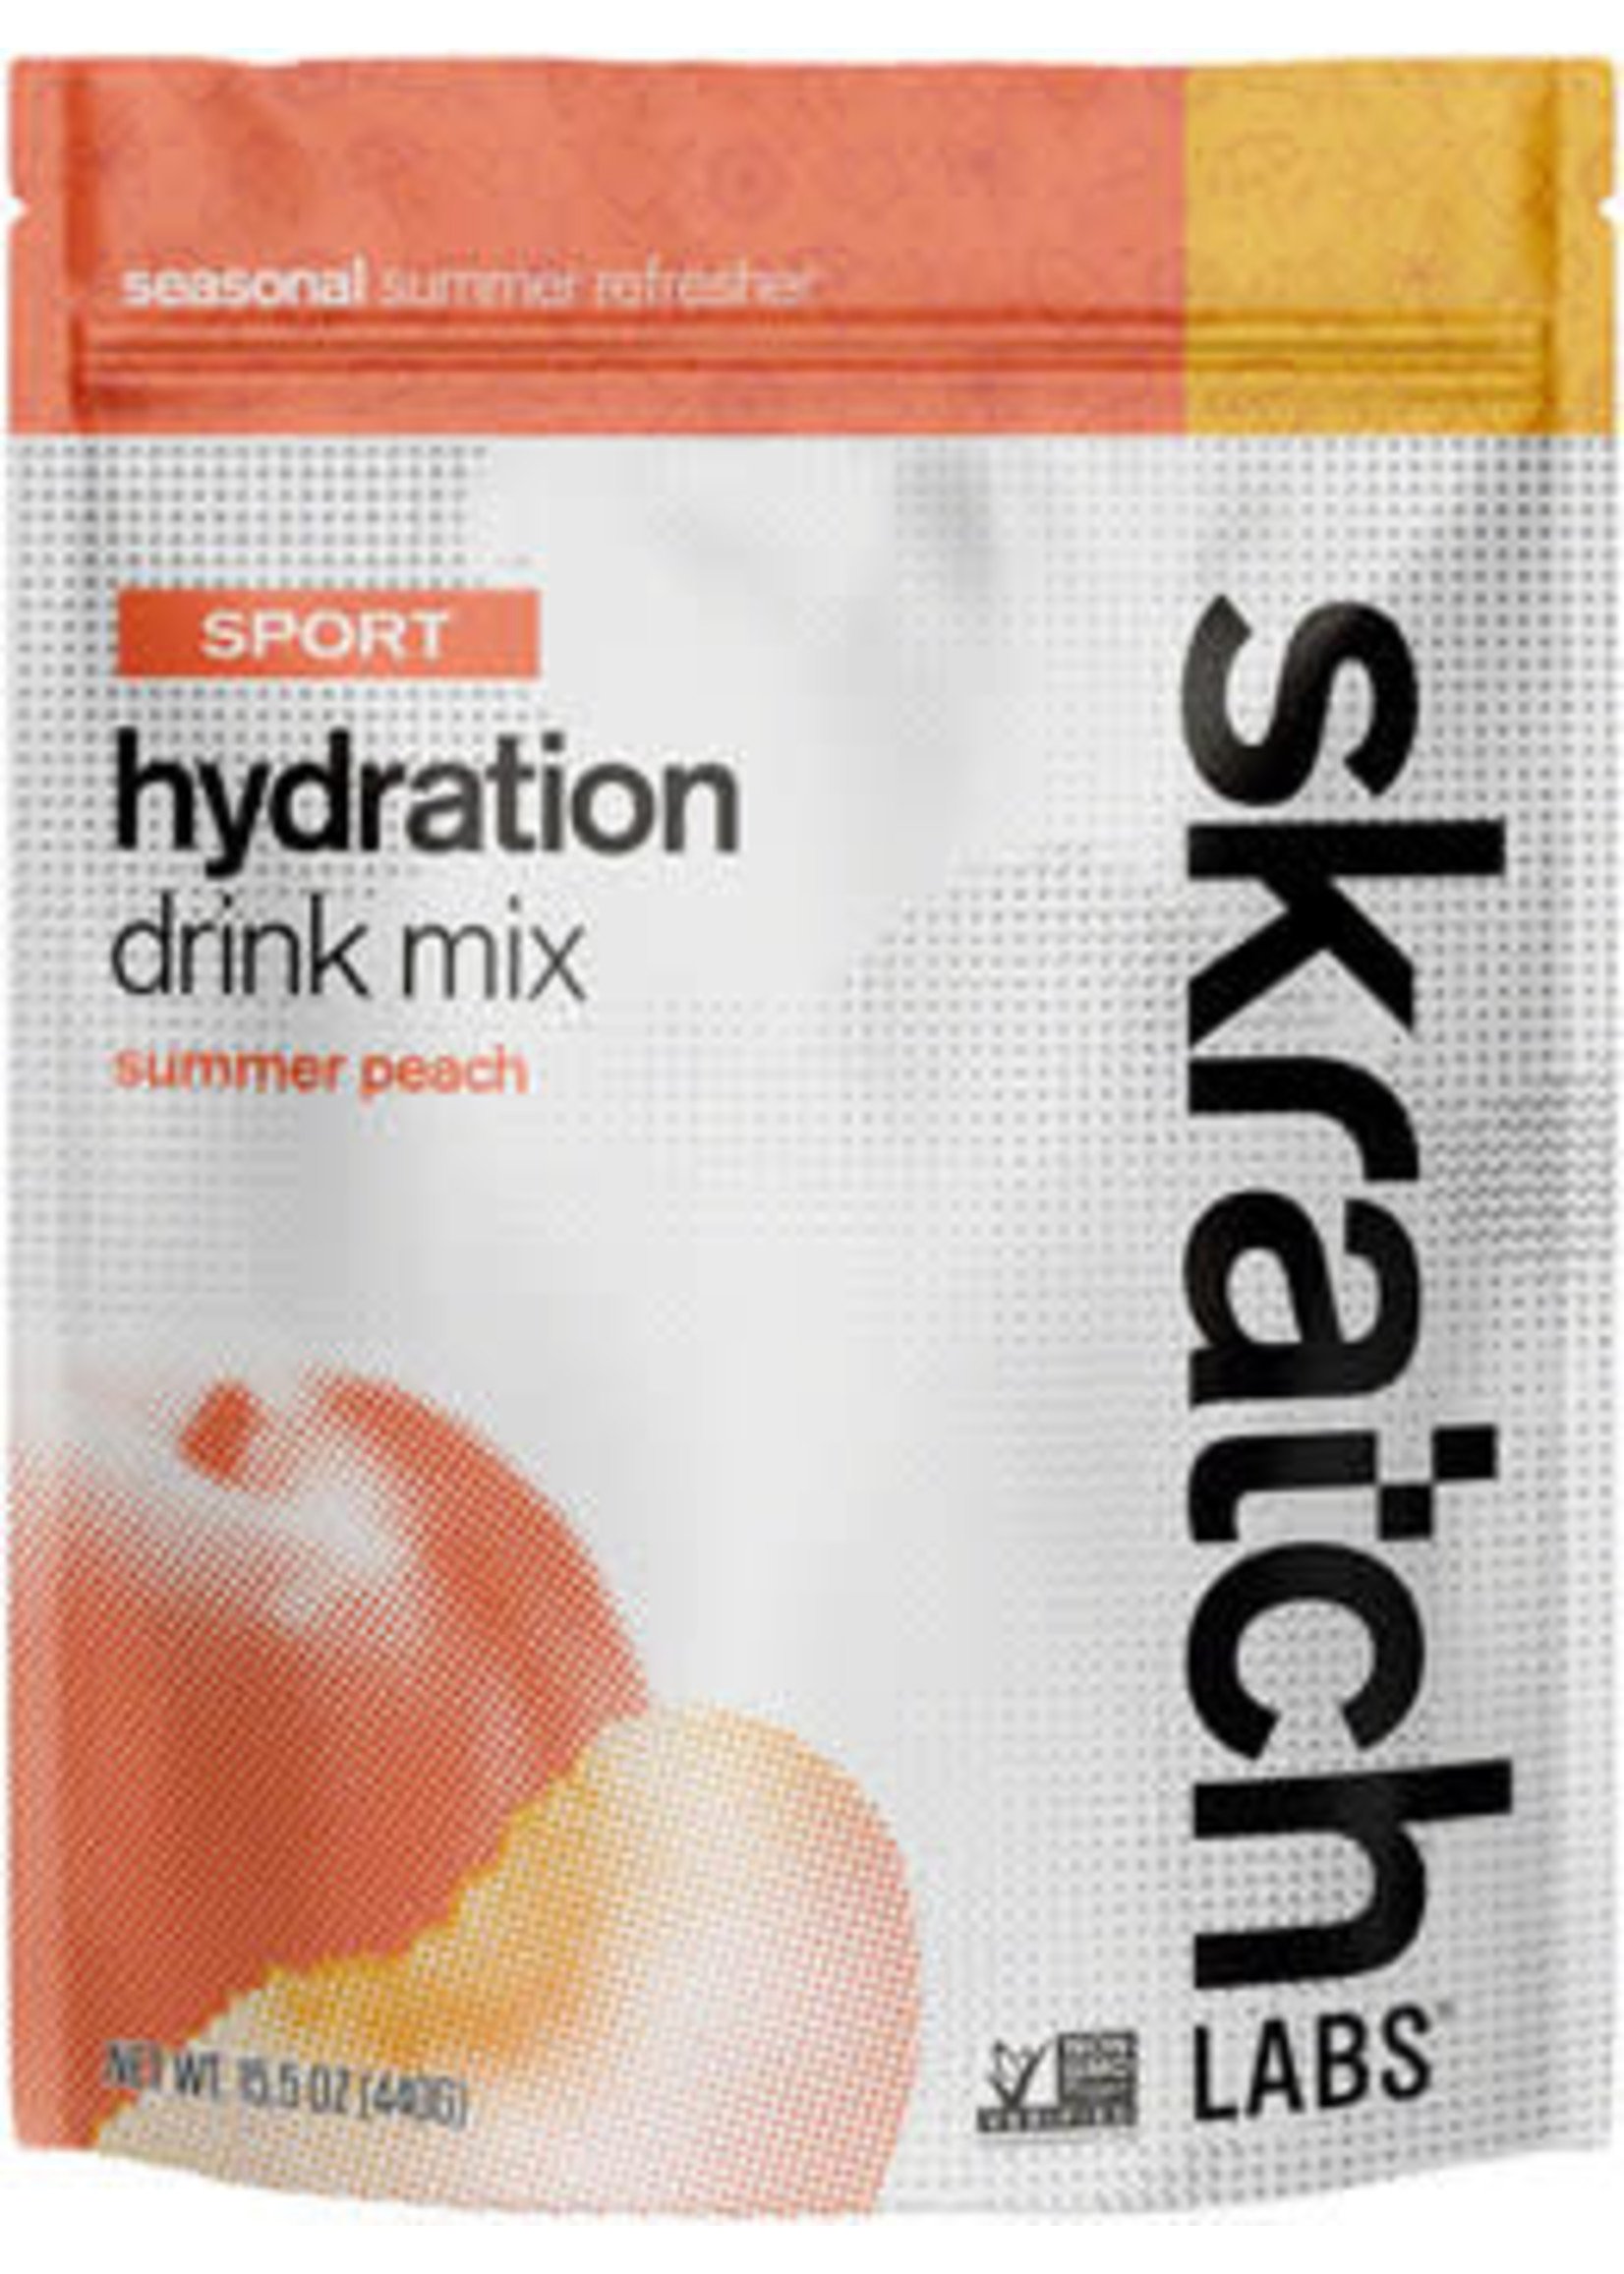 Skratch Skratch Labs Sport Hydration Drink Mix - Peach, 20-Serving Resealable Pouch